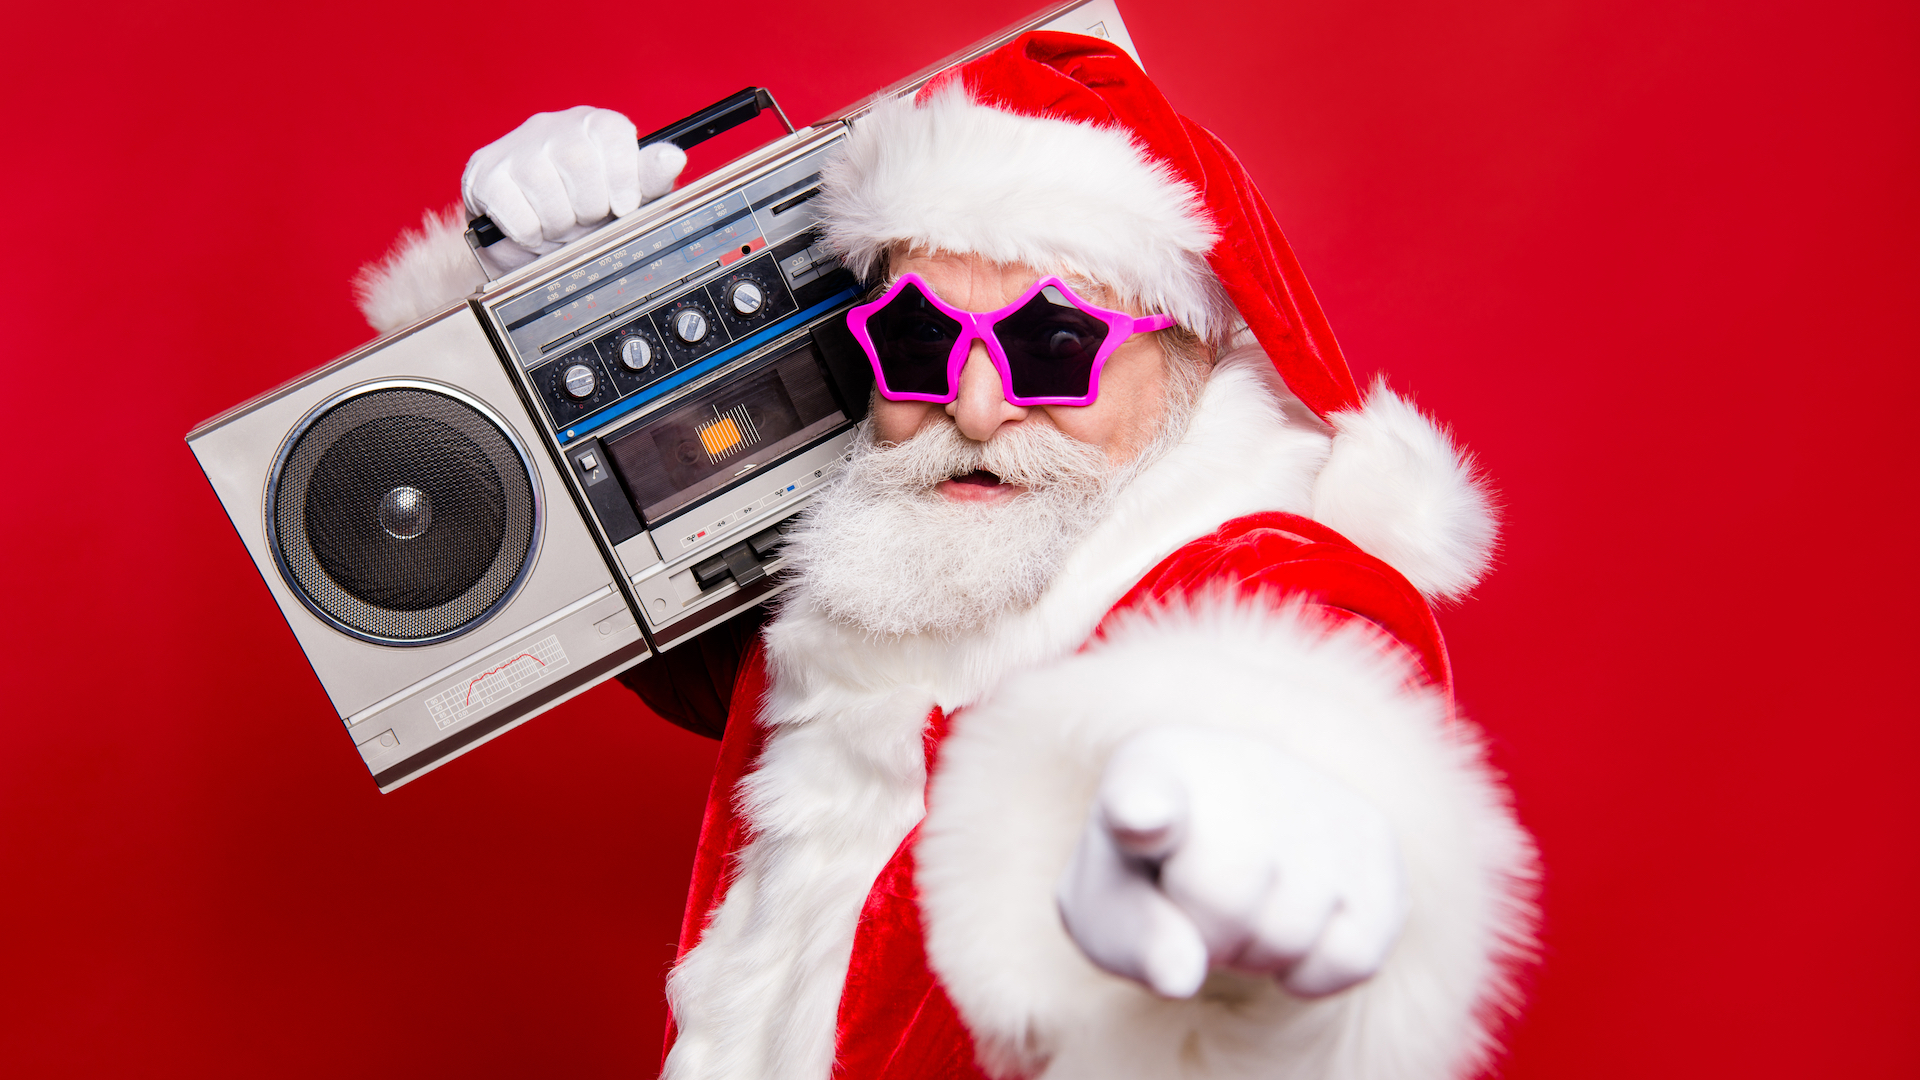 Santa Claus in sunglasses holding a portable stereo